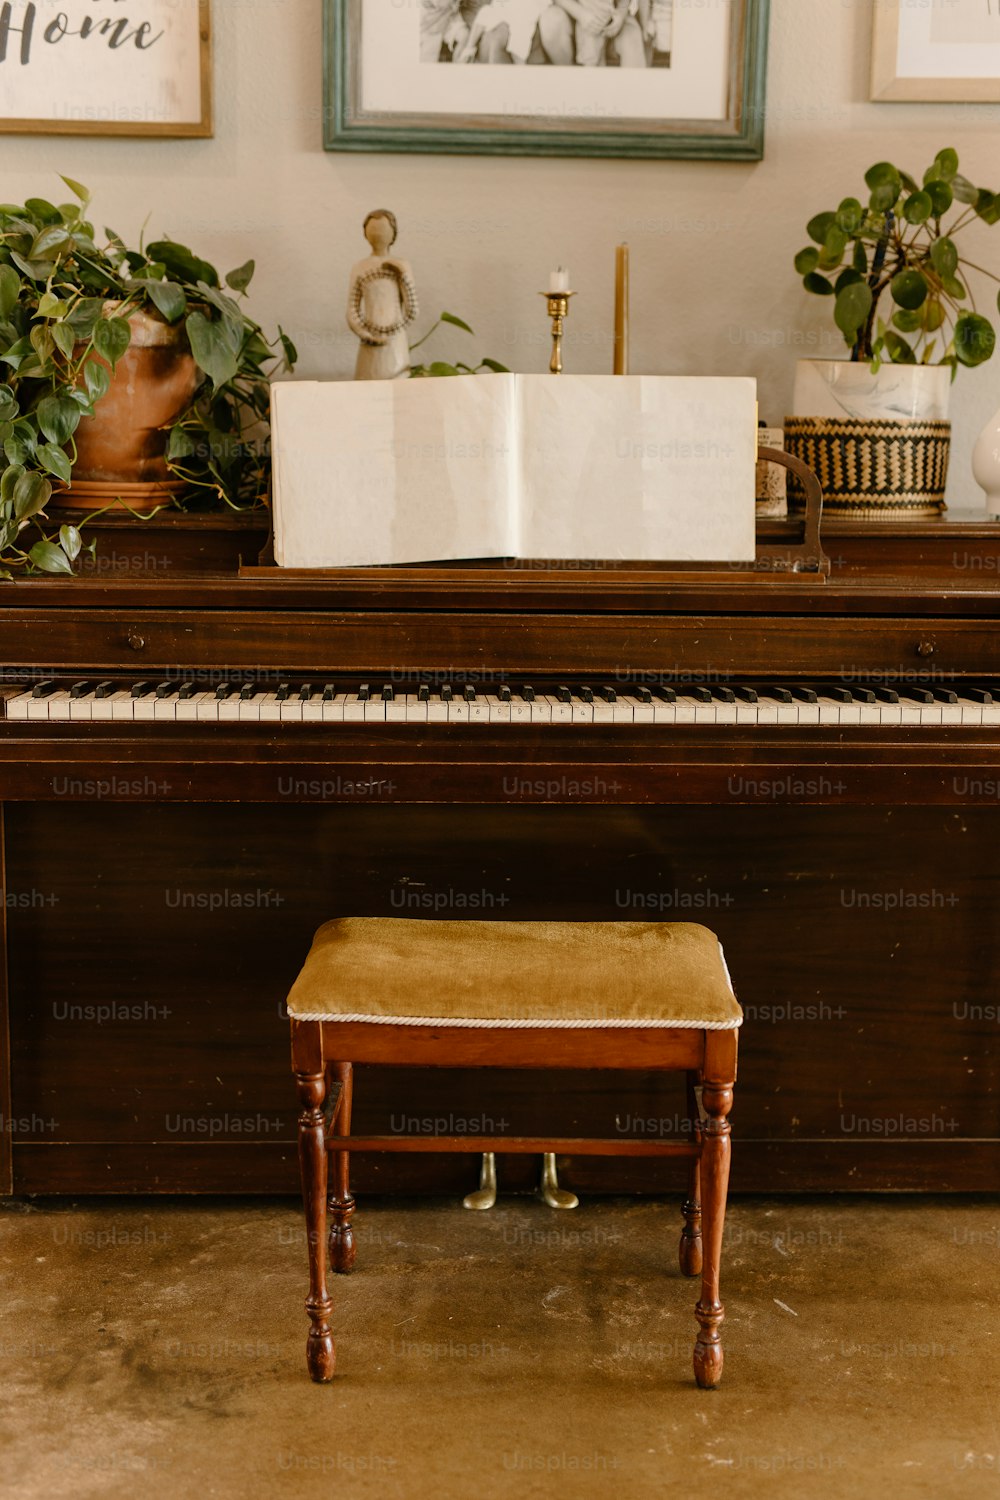 a piano sitting in front of a picture of a plant